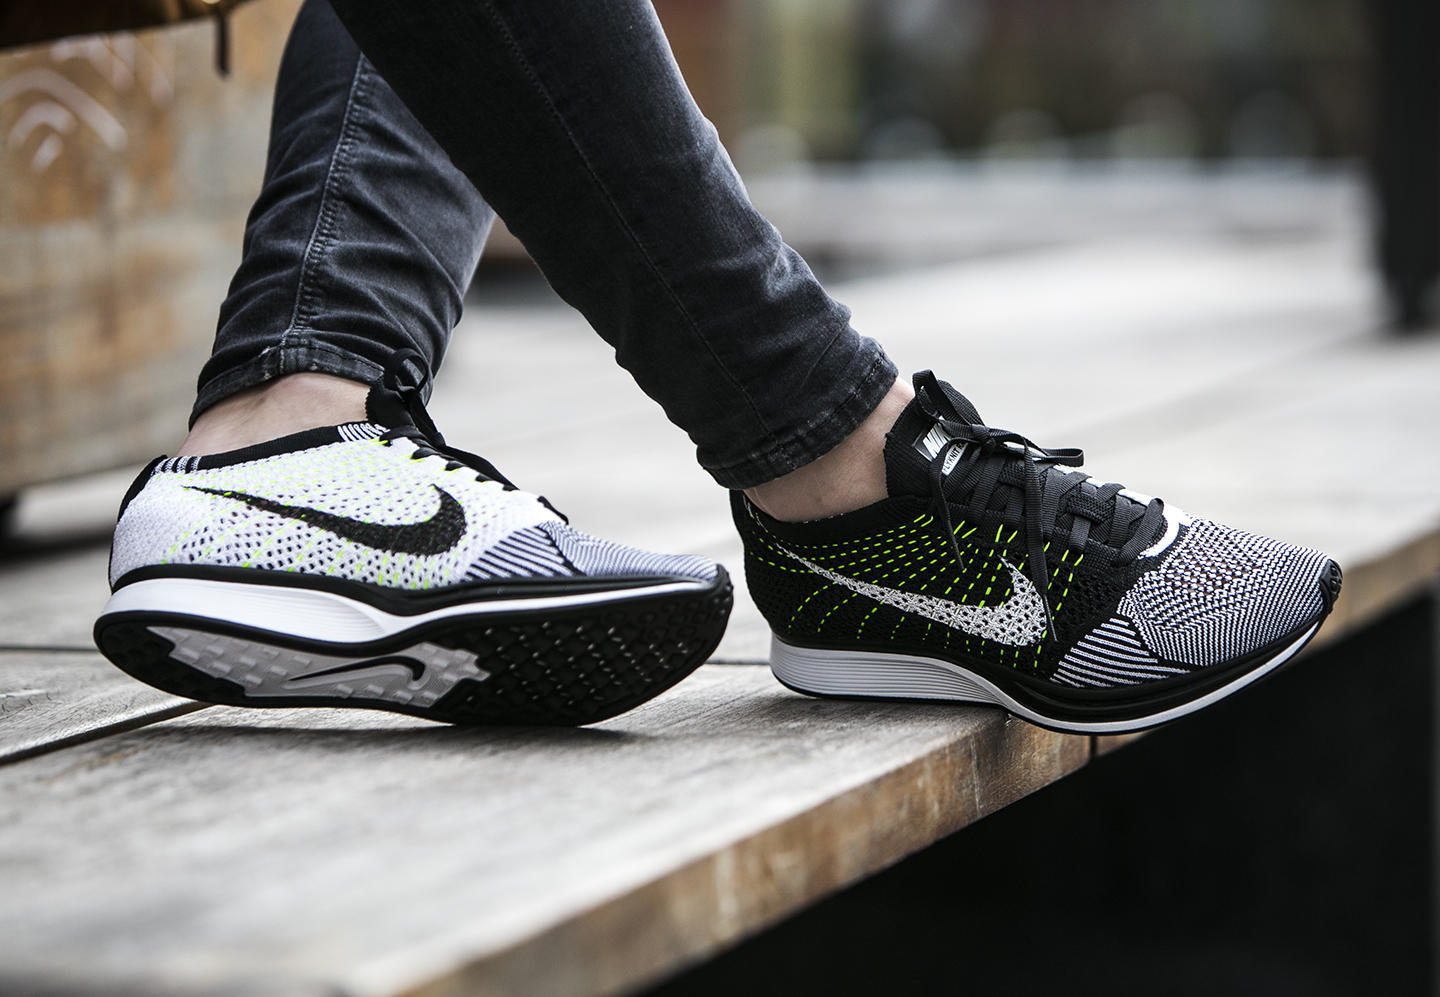 flyknit racer black and white